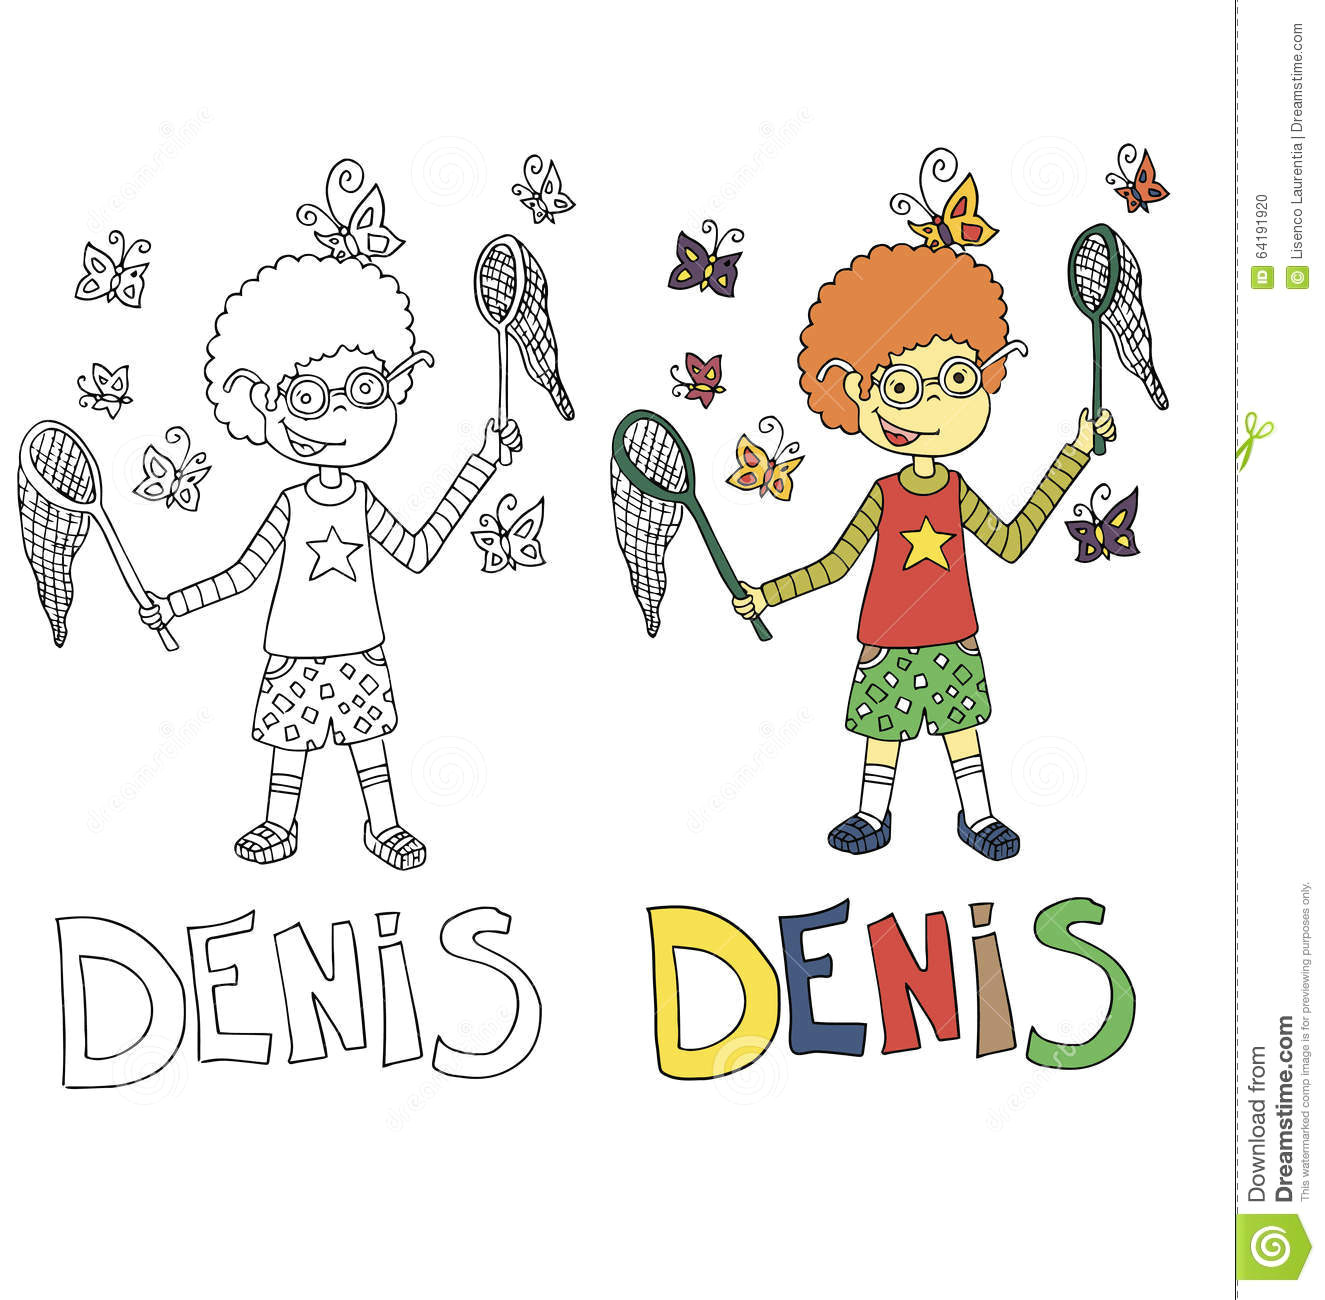 the simple drawing cartoon and with color of the image of children with different names in the compatibility with the character